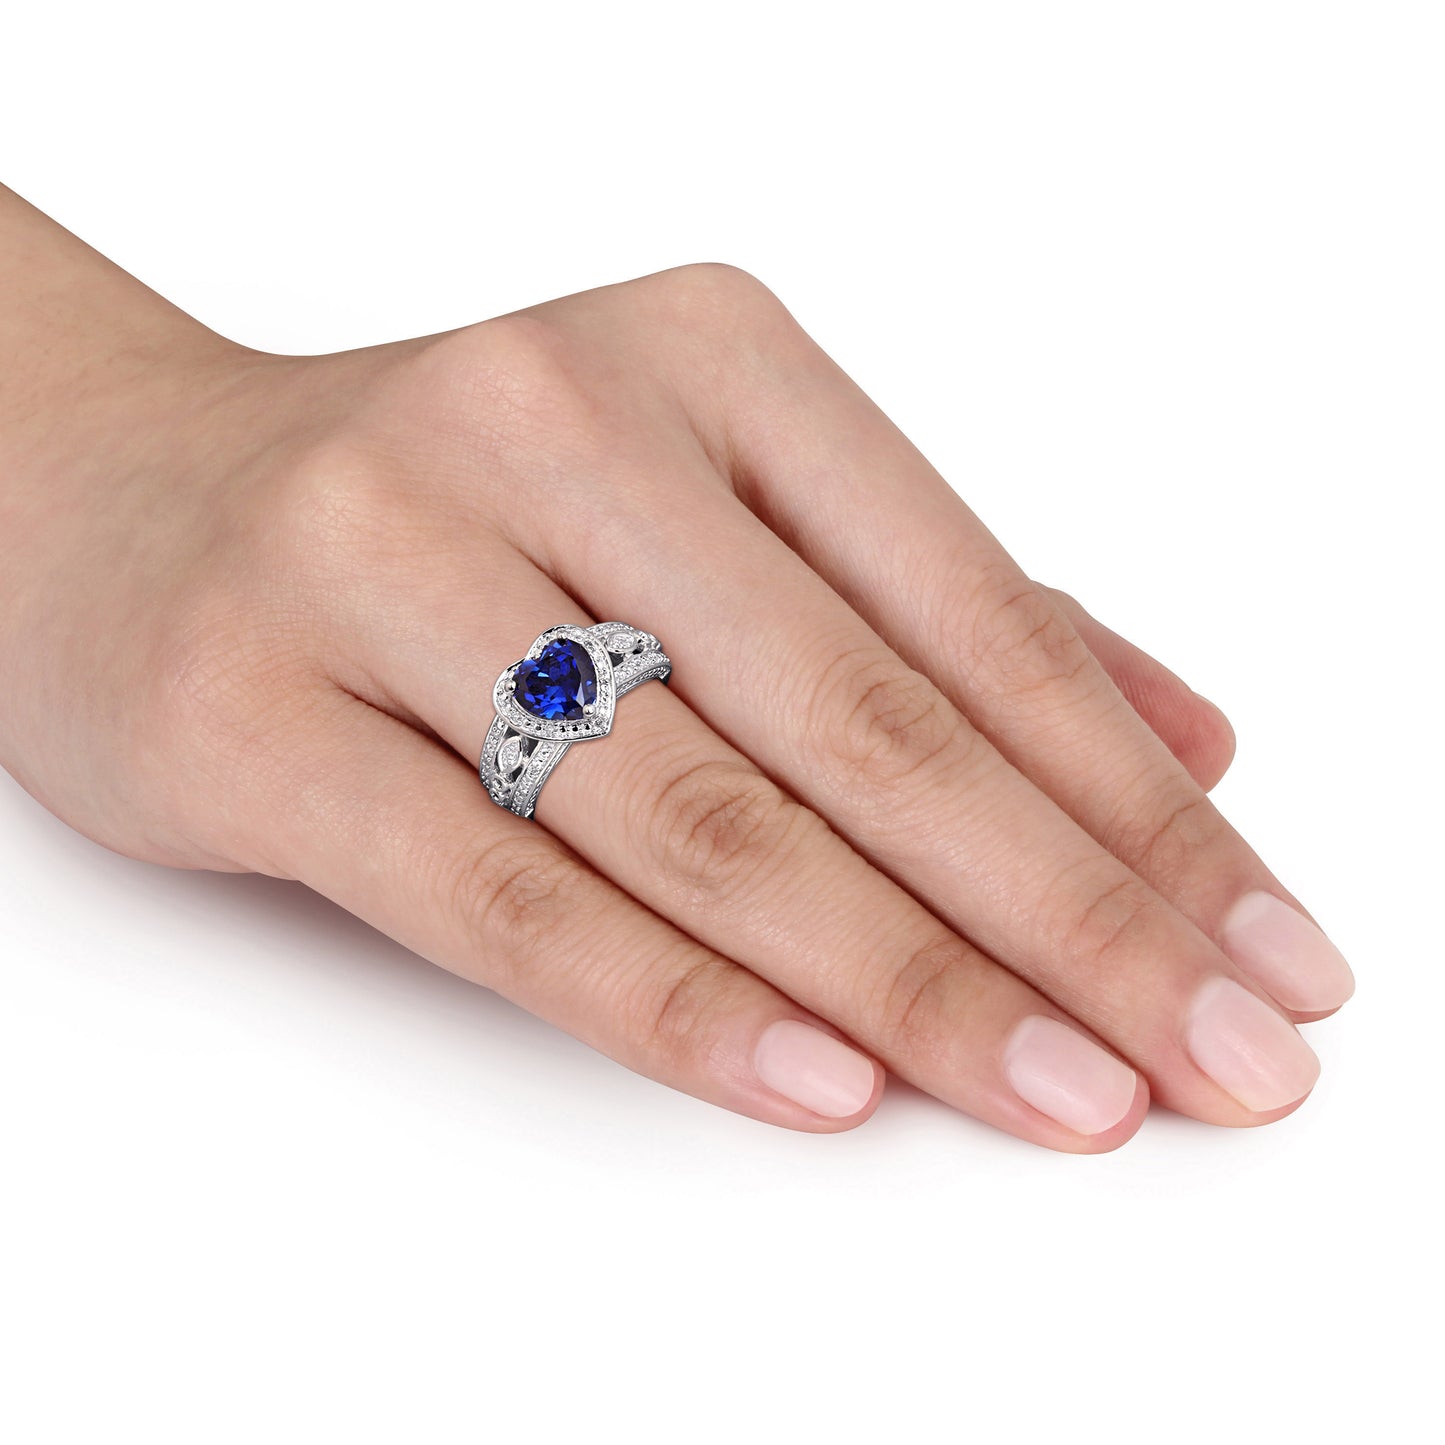 Heart Shaped Art Deco Sapphire & Diamond Ring in Sterling Silver